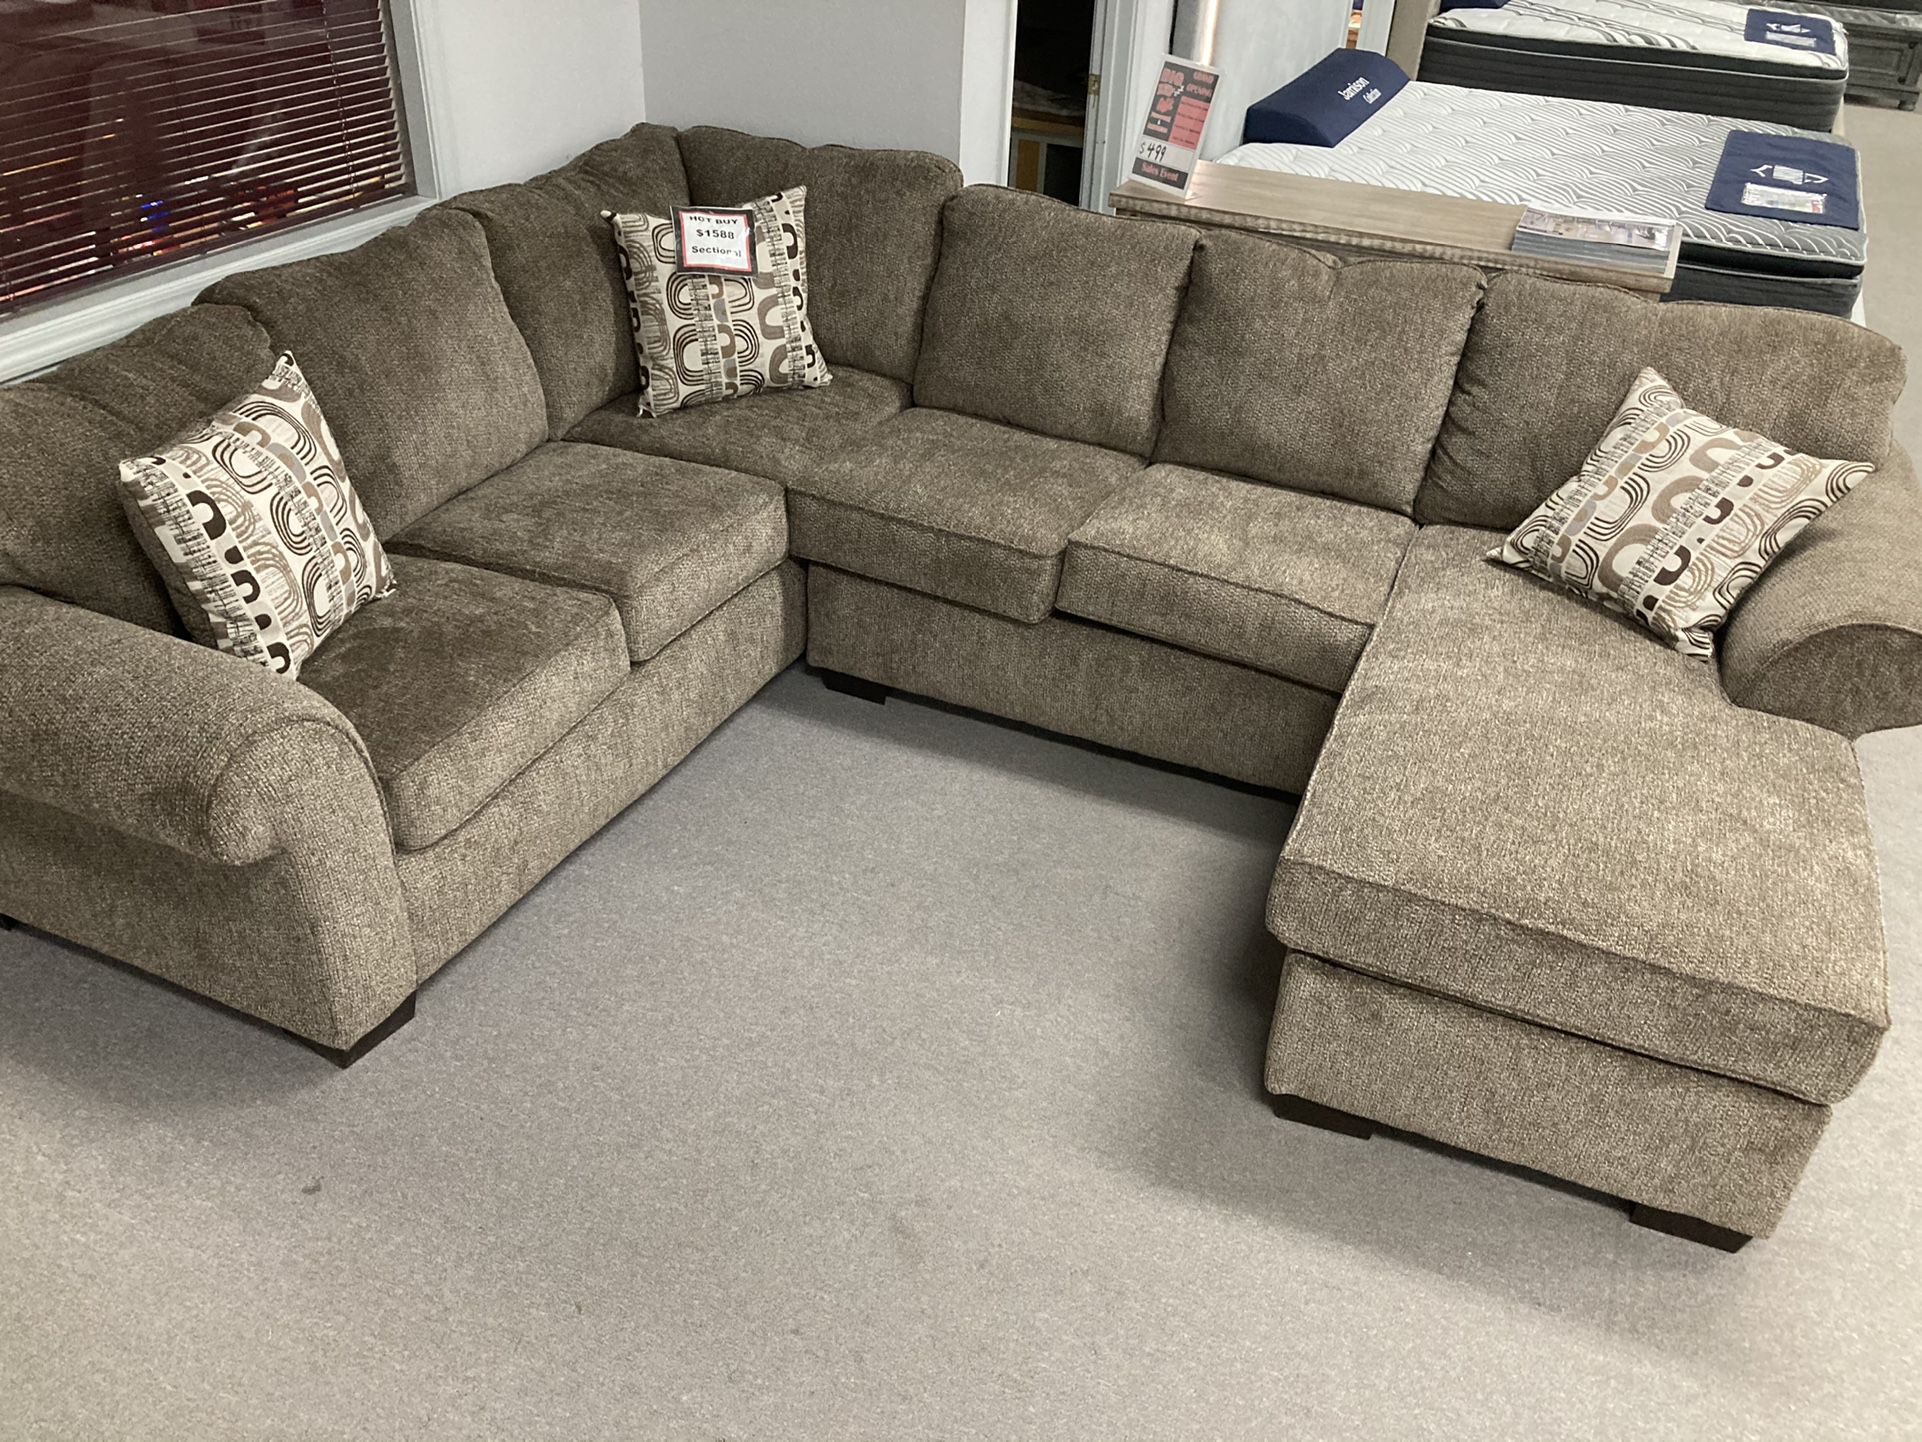 Brand New Jesse Coco Sectional With Reversible Ottoman!! Low As $39 Down!! No Credit Needed!!🛋